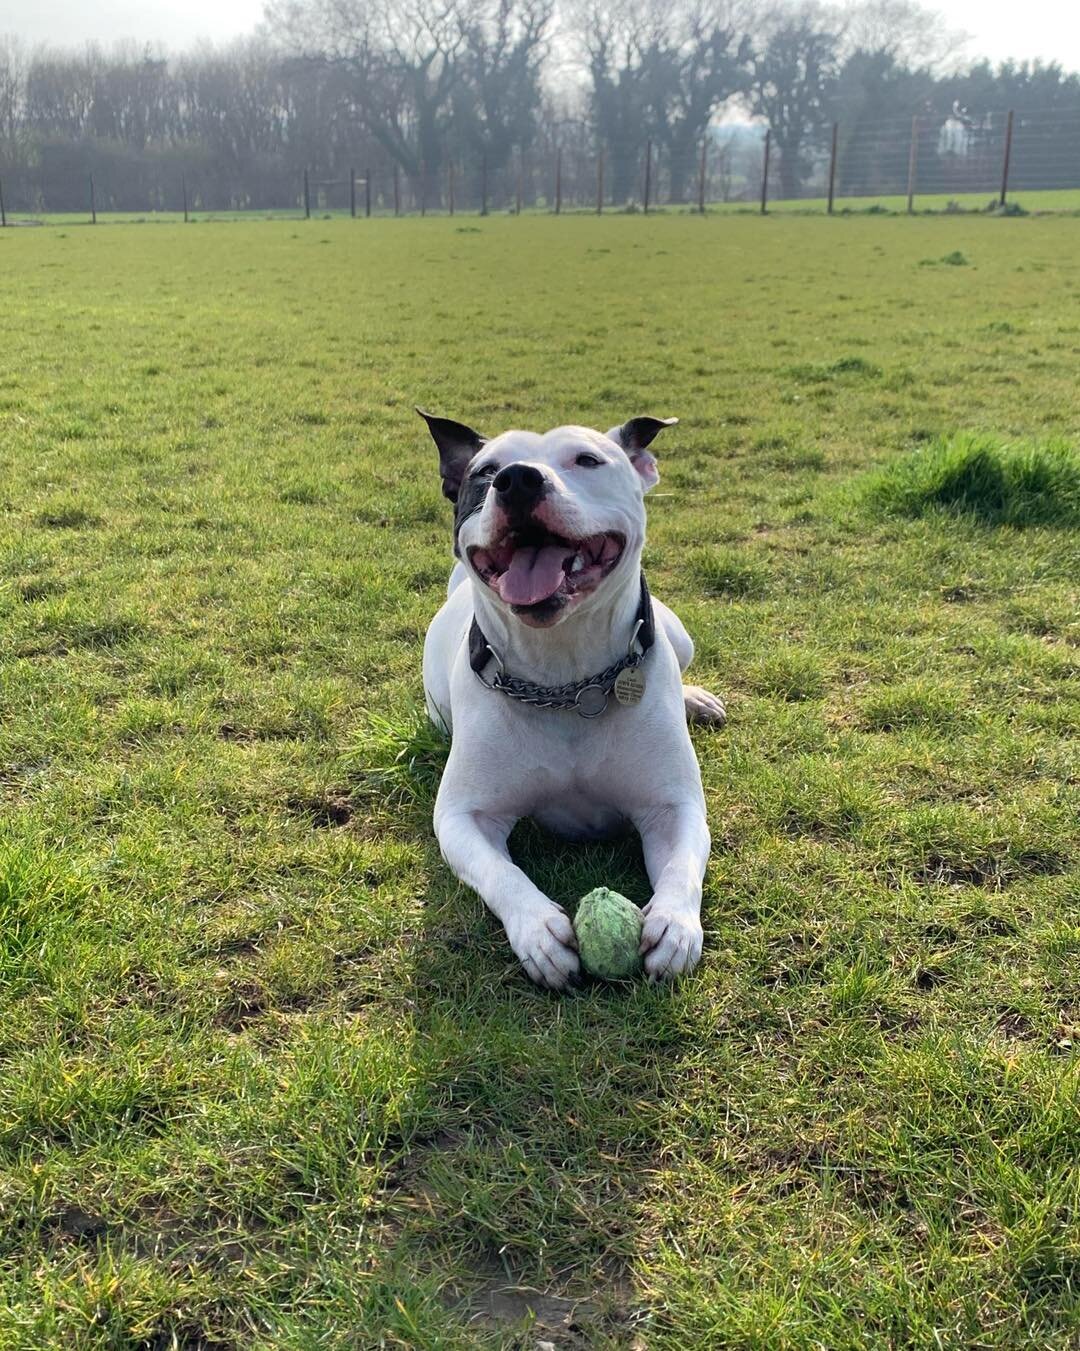 Wishing everyone a happy Tongue out Tuesday 👅

Comment below or message us your favourite #tongueouttuesday photos of your dog to be included in next weeks post!

Team Wagdale 🐾

For more information or to book the exercise field please message us 